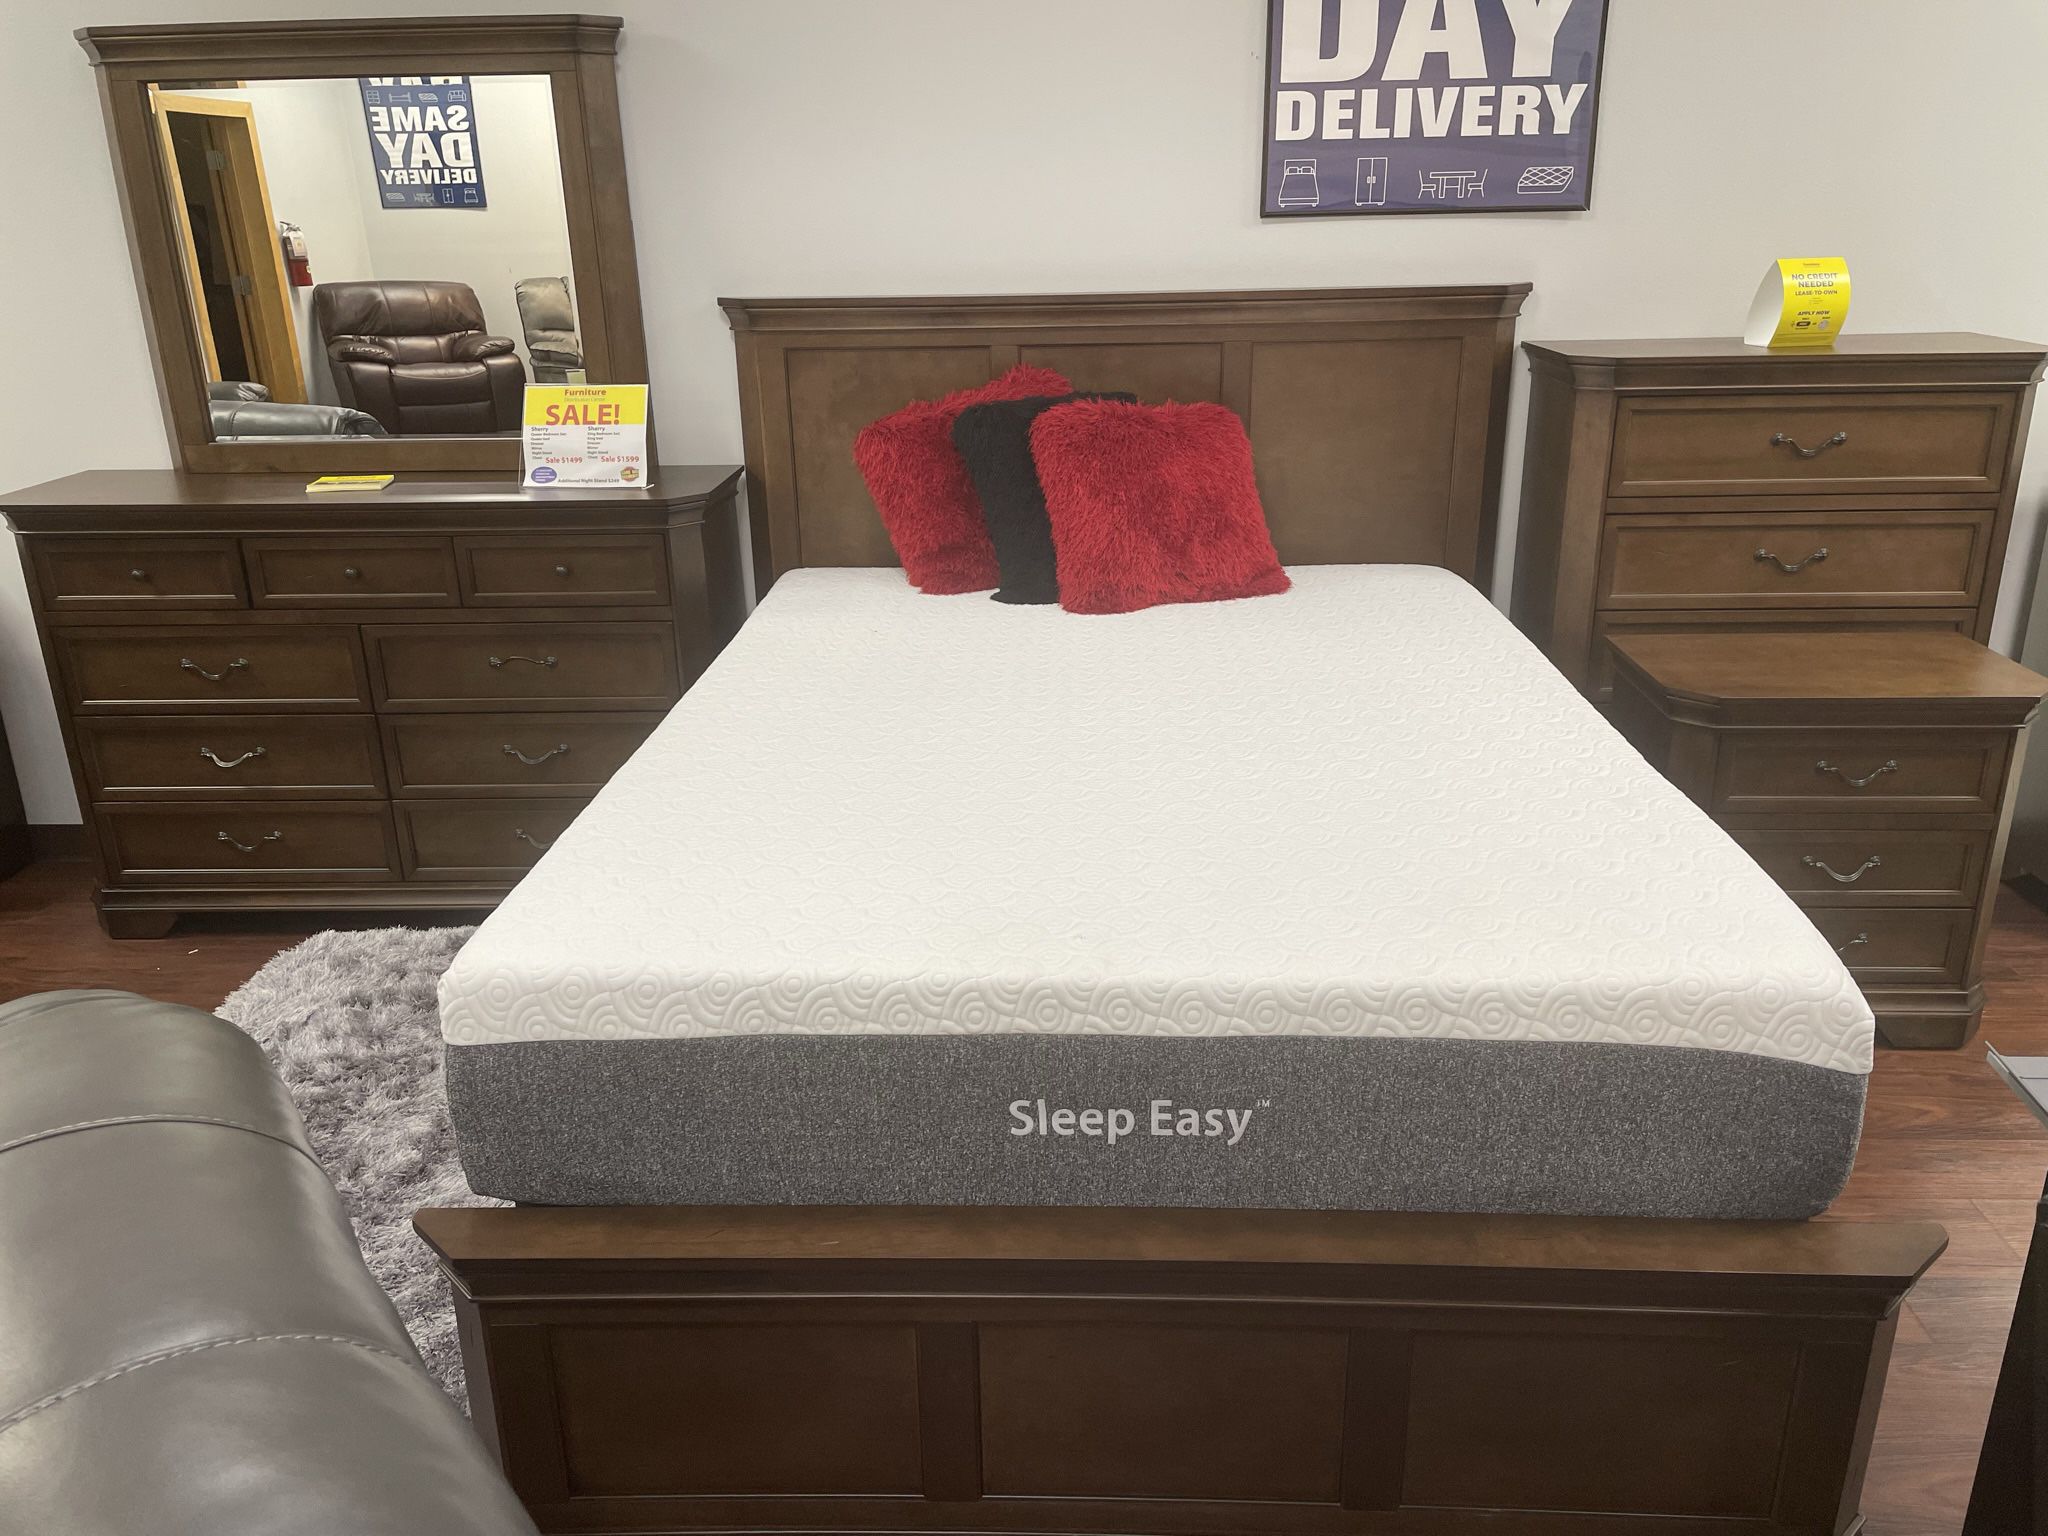 Complete Brown Sherry Bedroom Set Queen $999 King $1099 ** Same Day Delivery ** $50 Down No Credit Needed